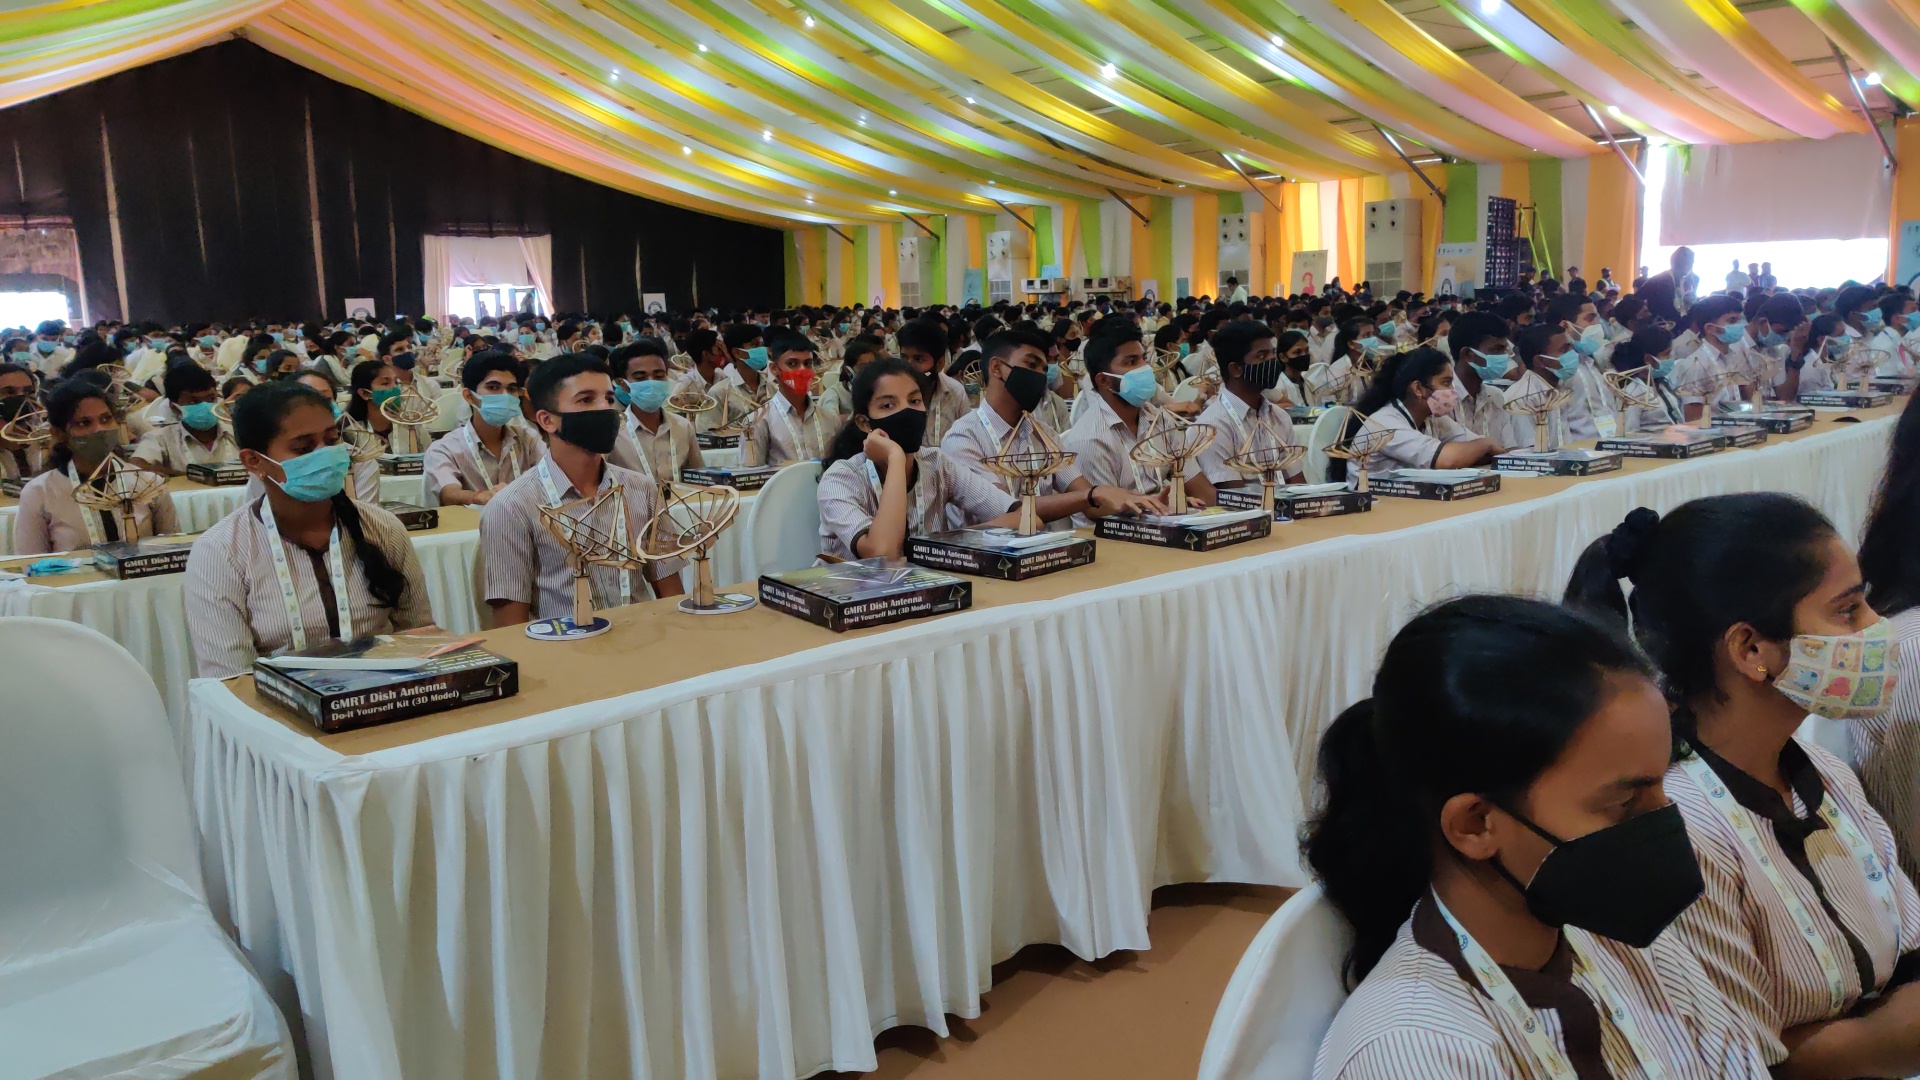 Students Participating In Guinness World Record along with 1500 other students